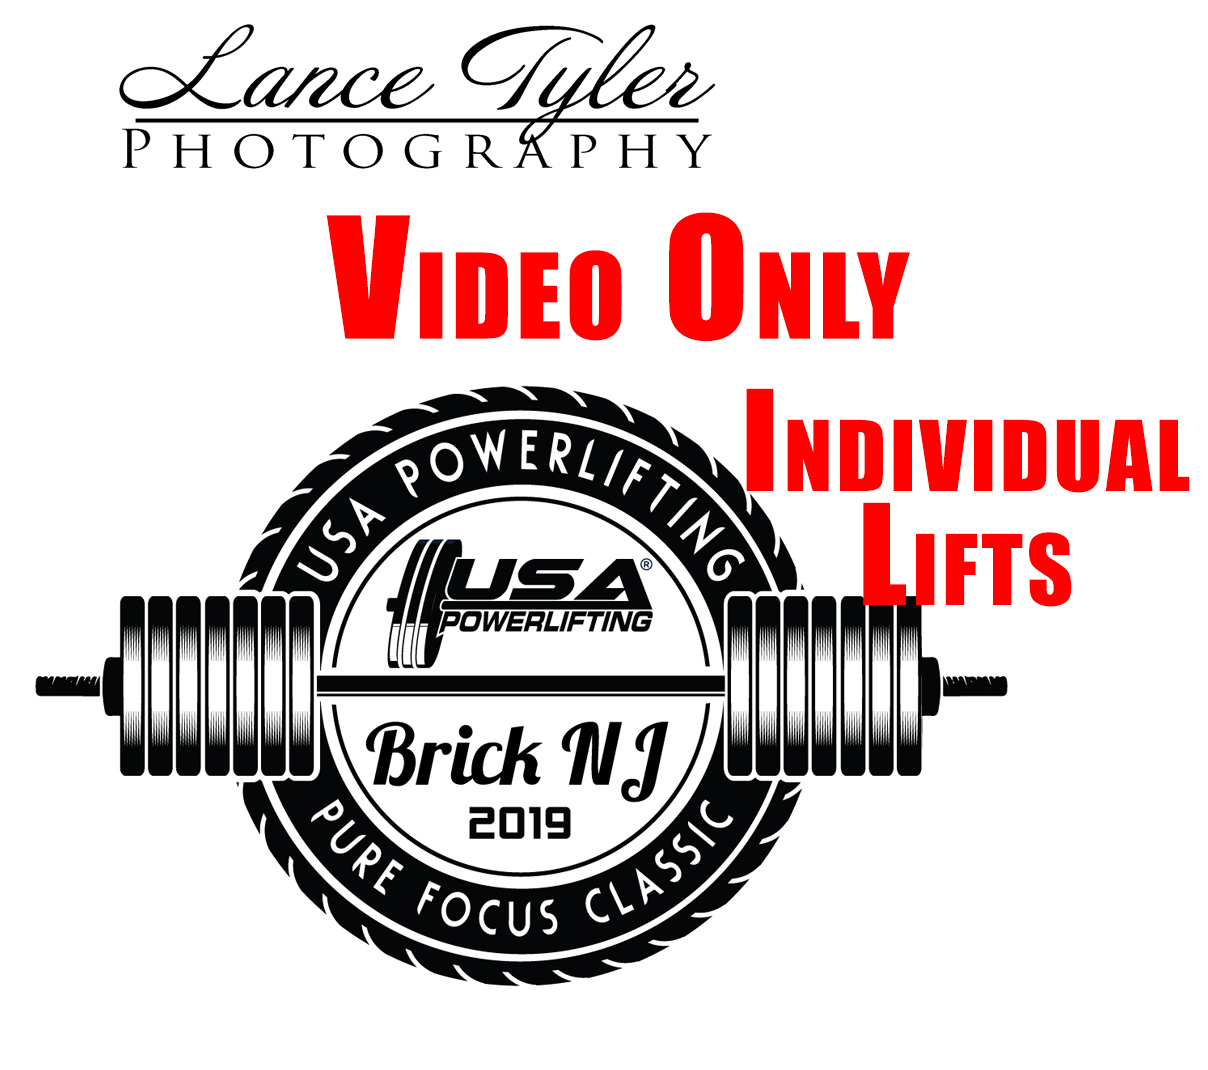 Video Only: Individual Lifts